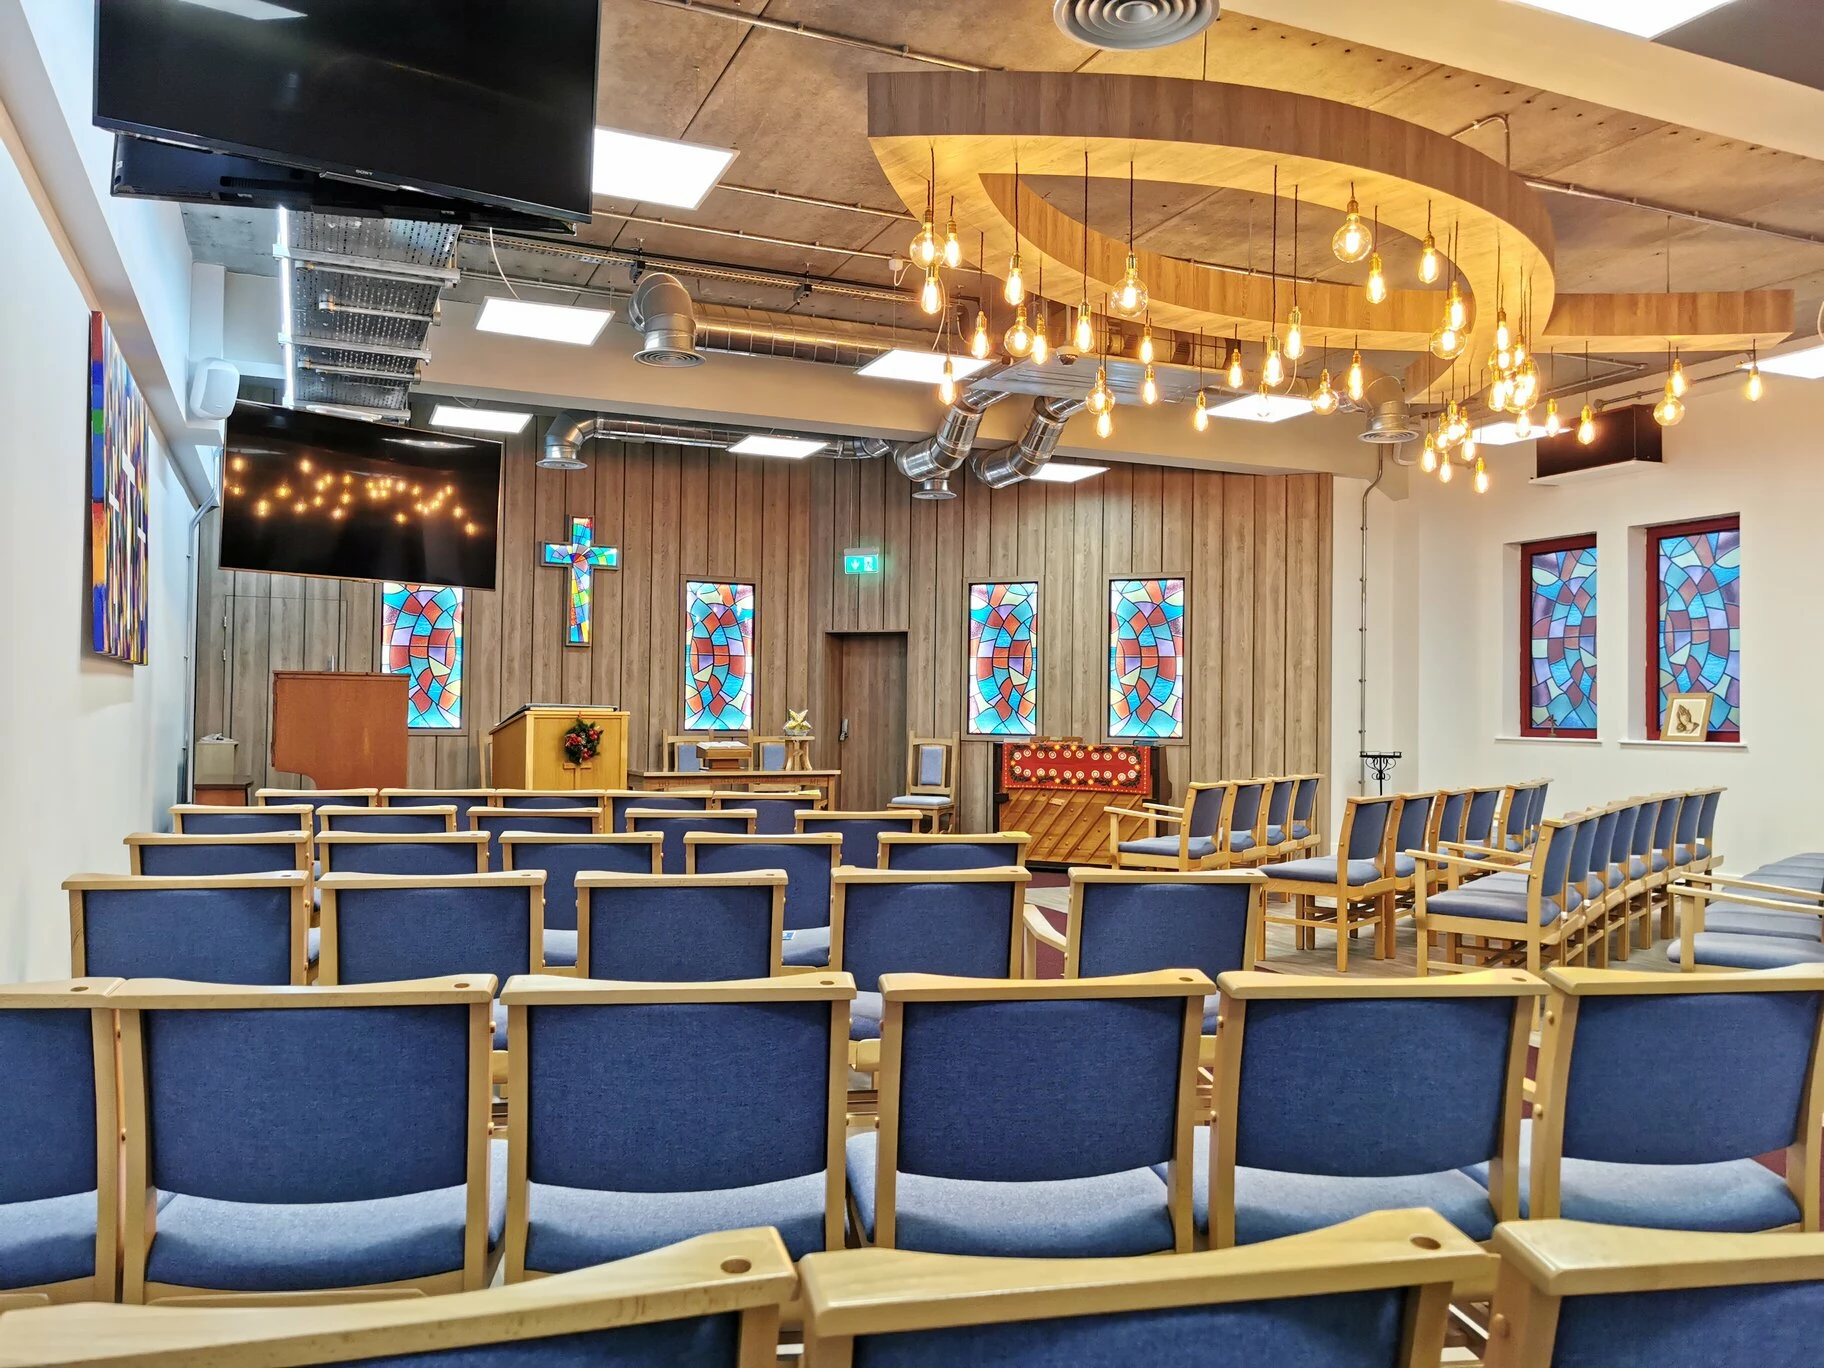 The old flood damaged office space has been transformed into a welcoming haven for the Church